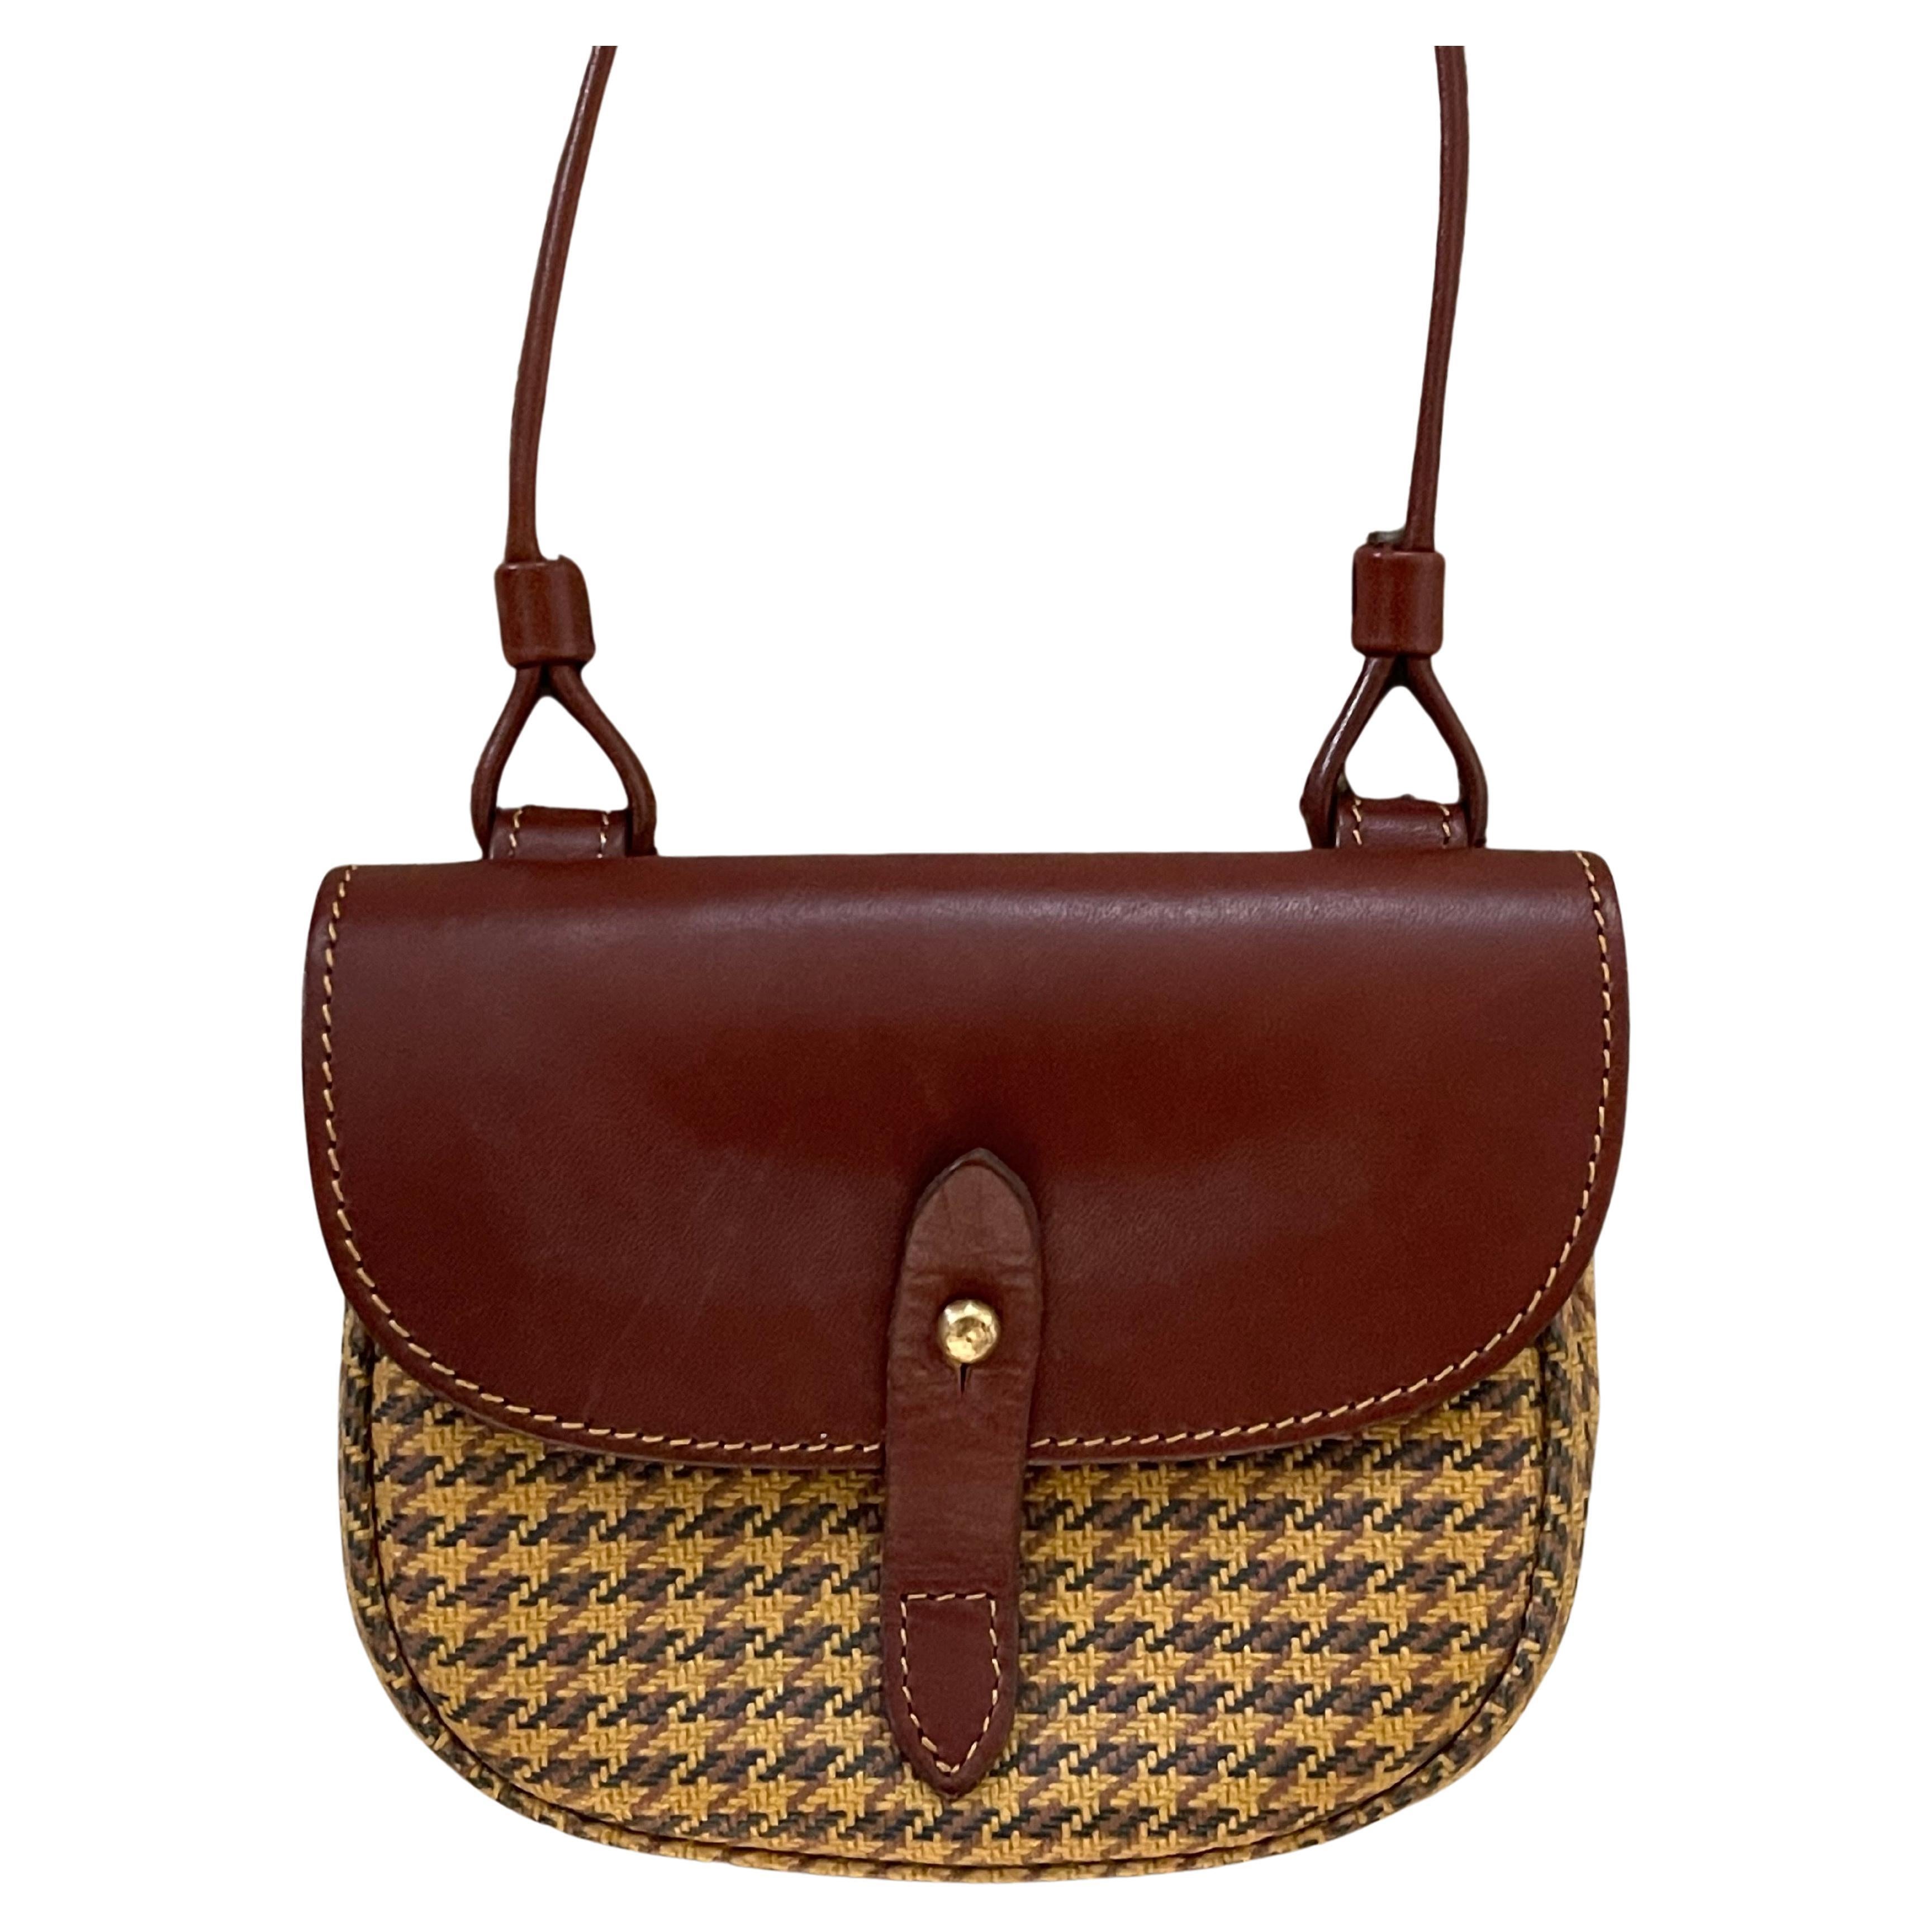 Small cartridge houndstooth shoulder bag by Marley Hodgson for Ghurka, circa 1990s.  The bag is in good vintage condition and measures 6